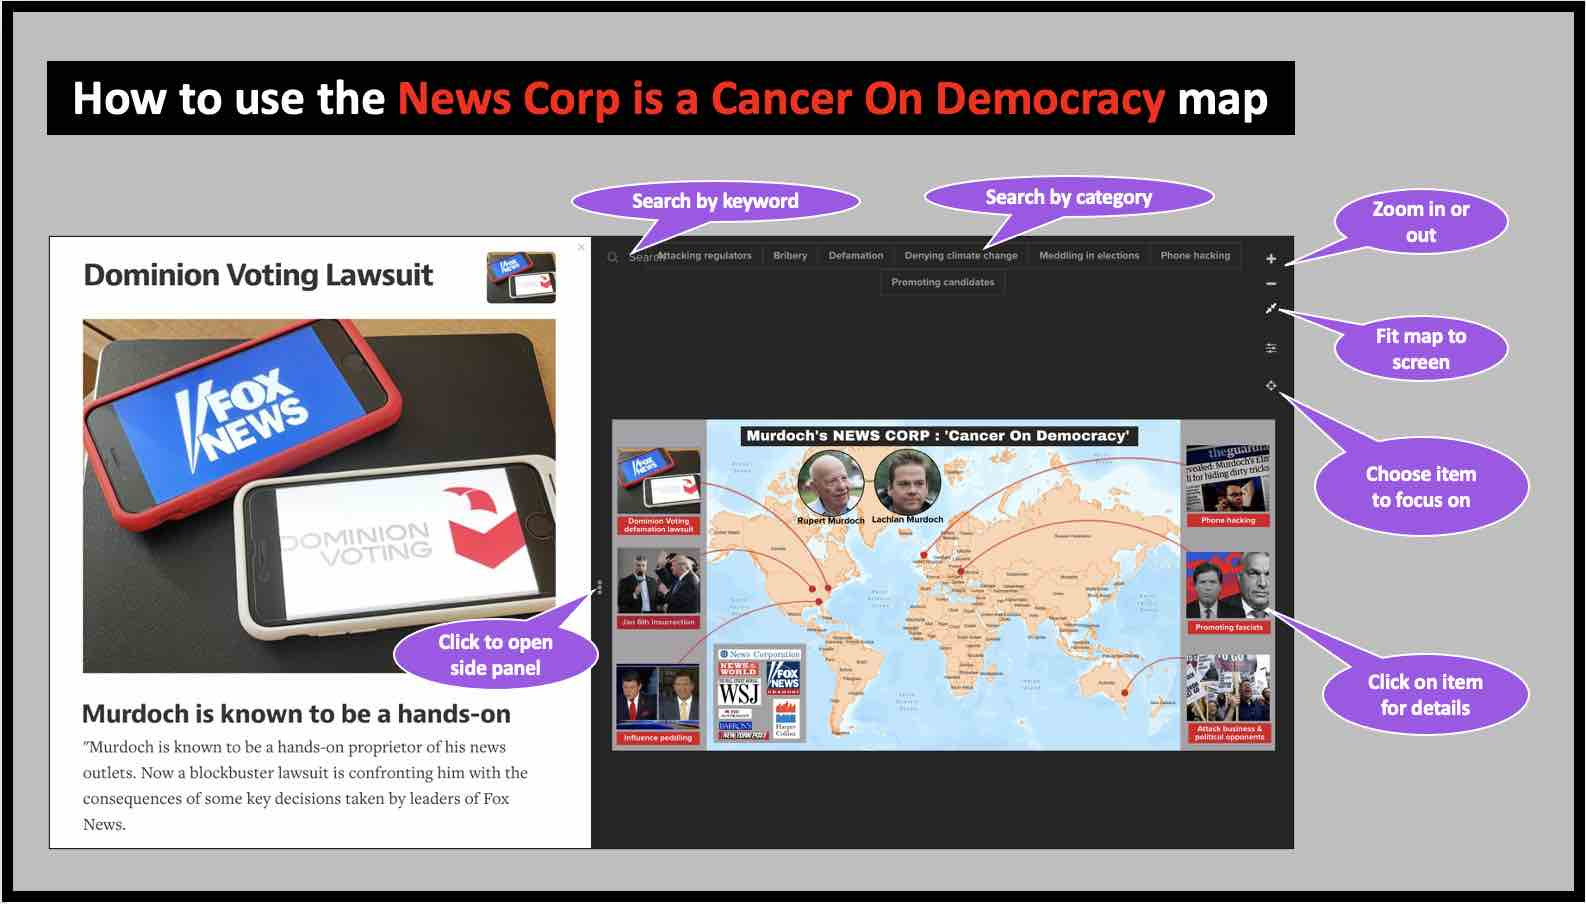 How to use the Rupert Murdoch, News Corp, Fox News are a cancer on democracy map.